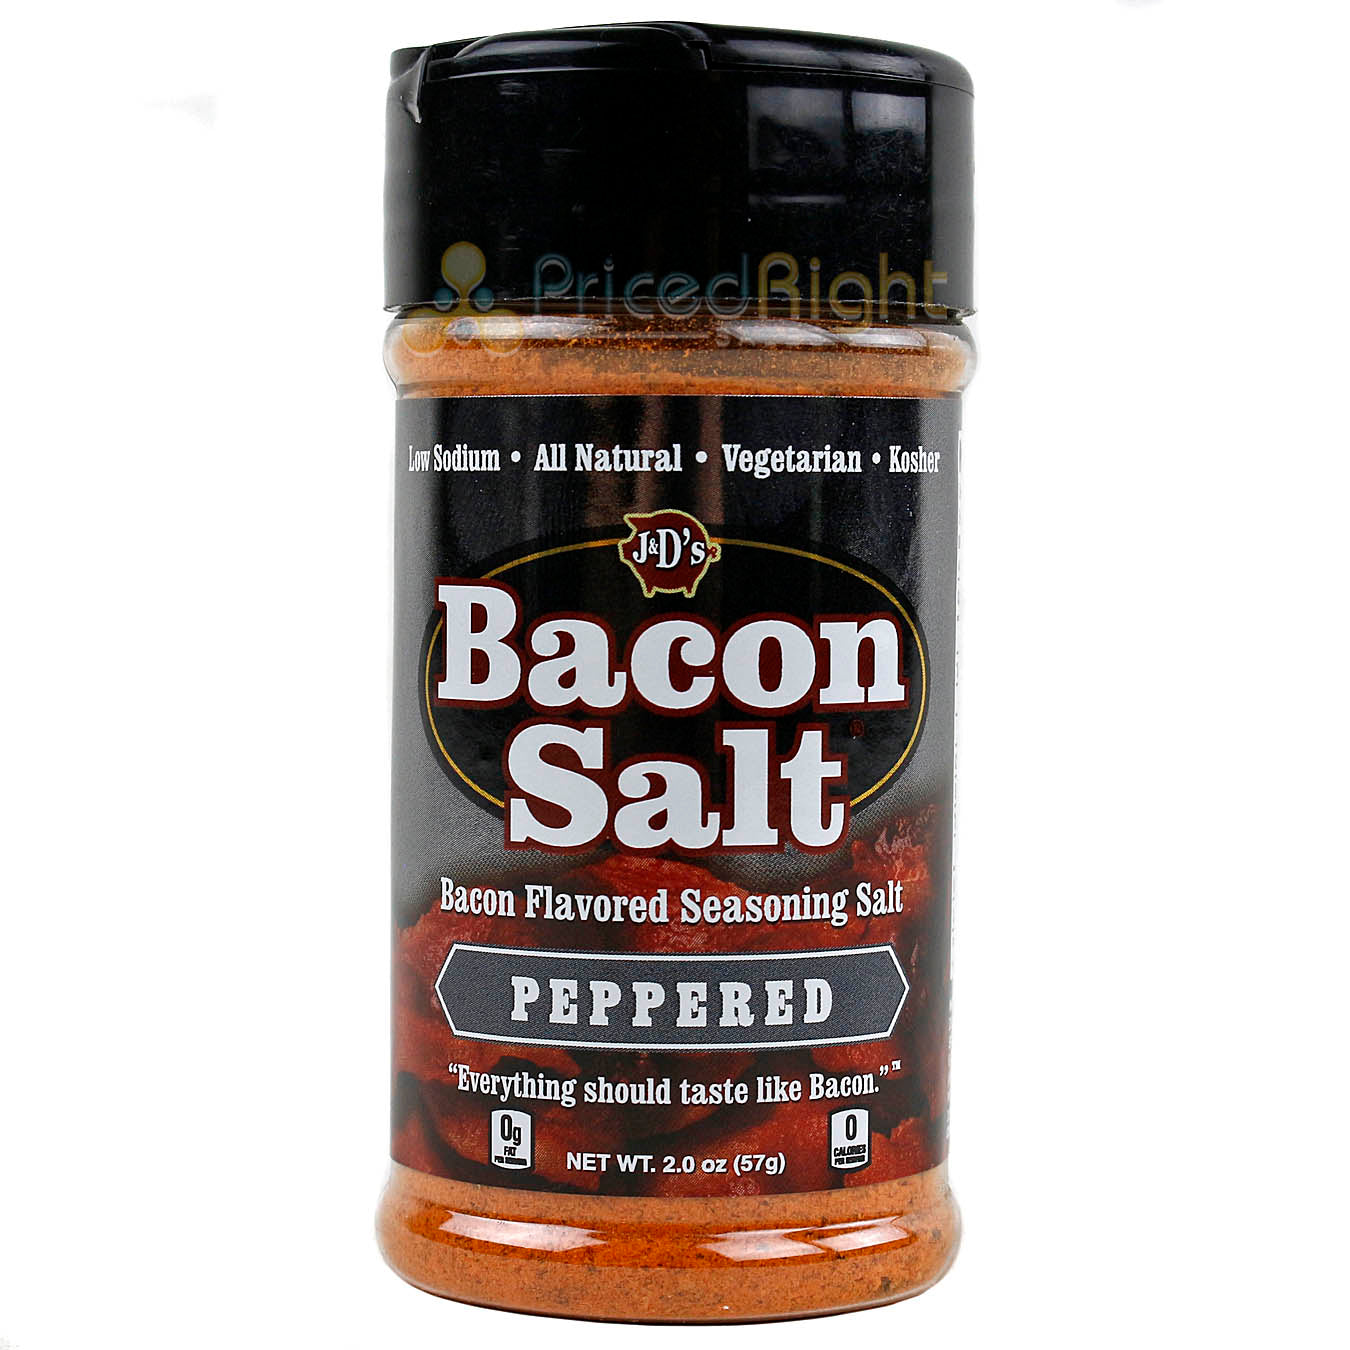 J&D's Hickory Peppered & Original Spice All Natural Bacon Flavored Seasoning Rub